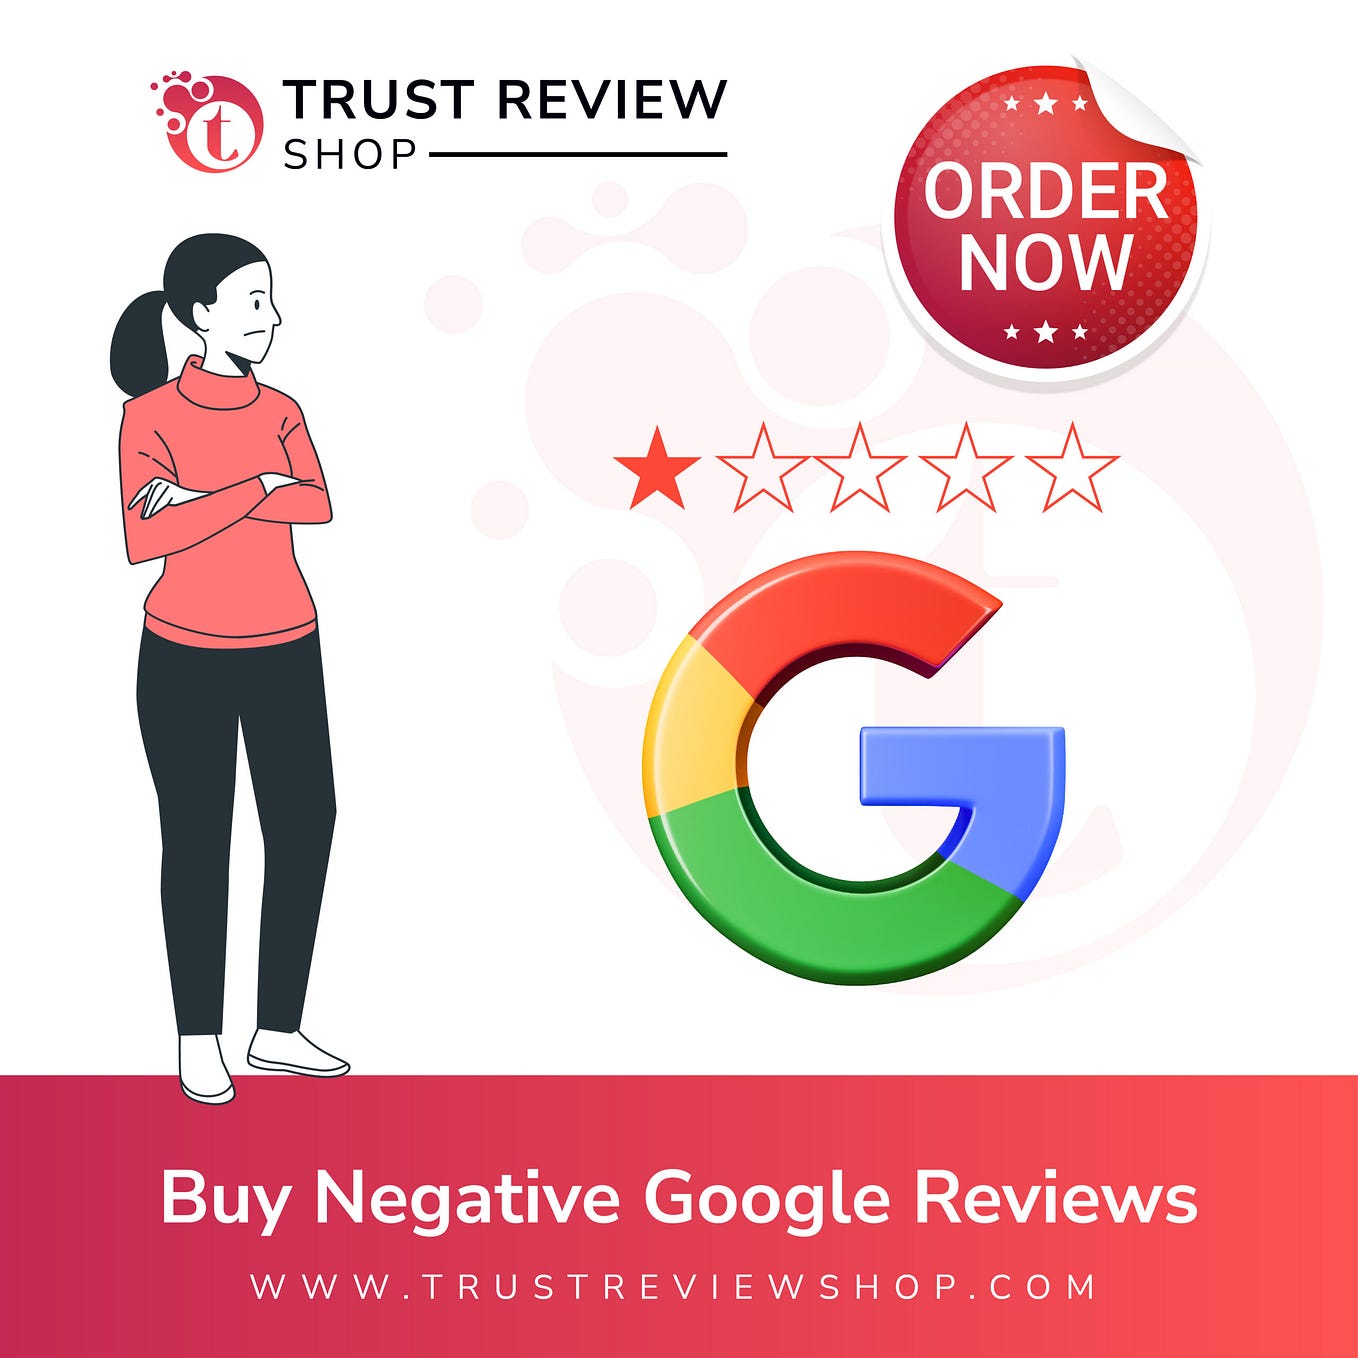 Can you trust Google reviews?